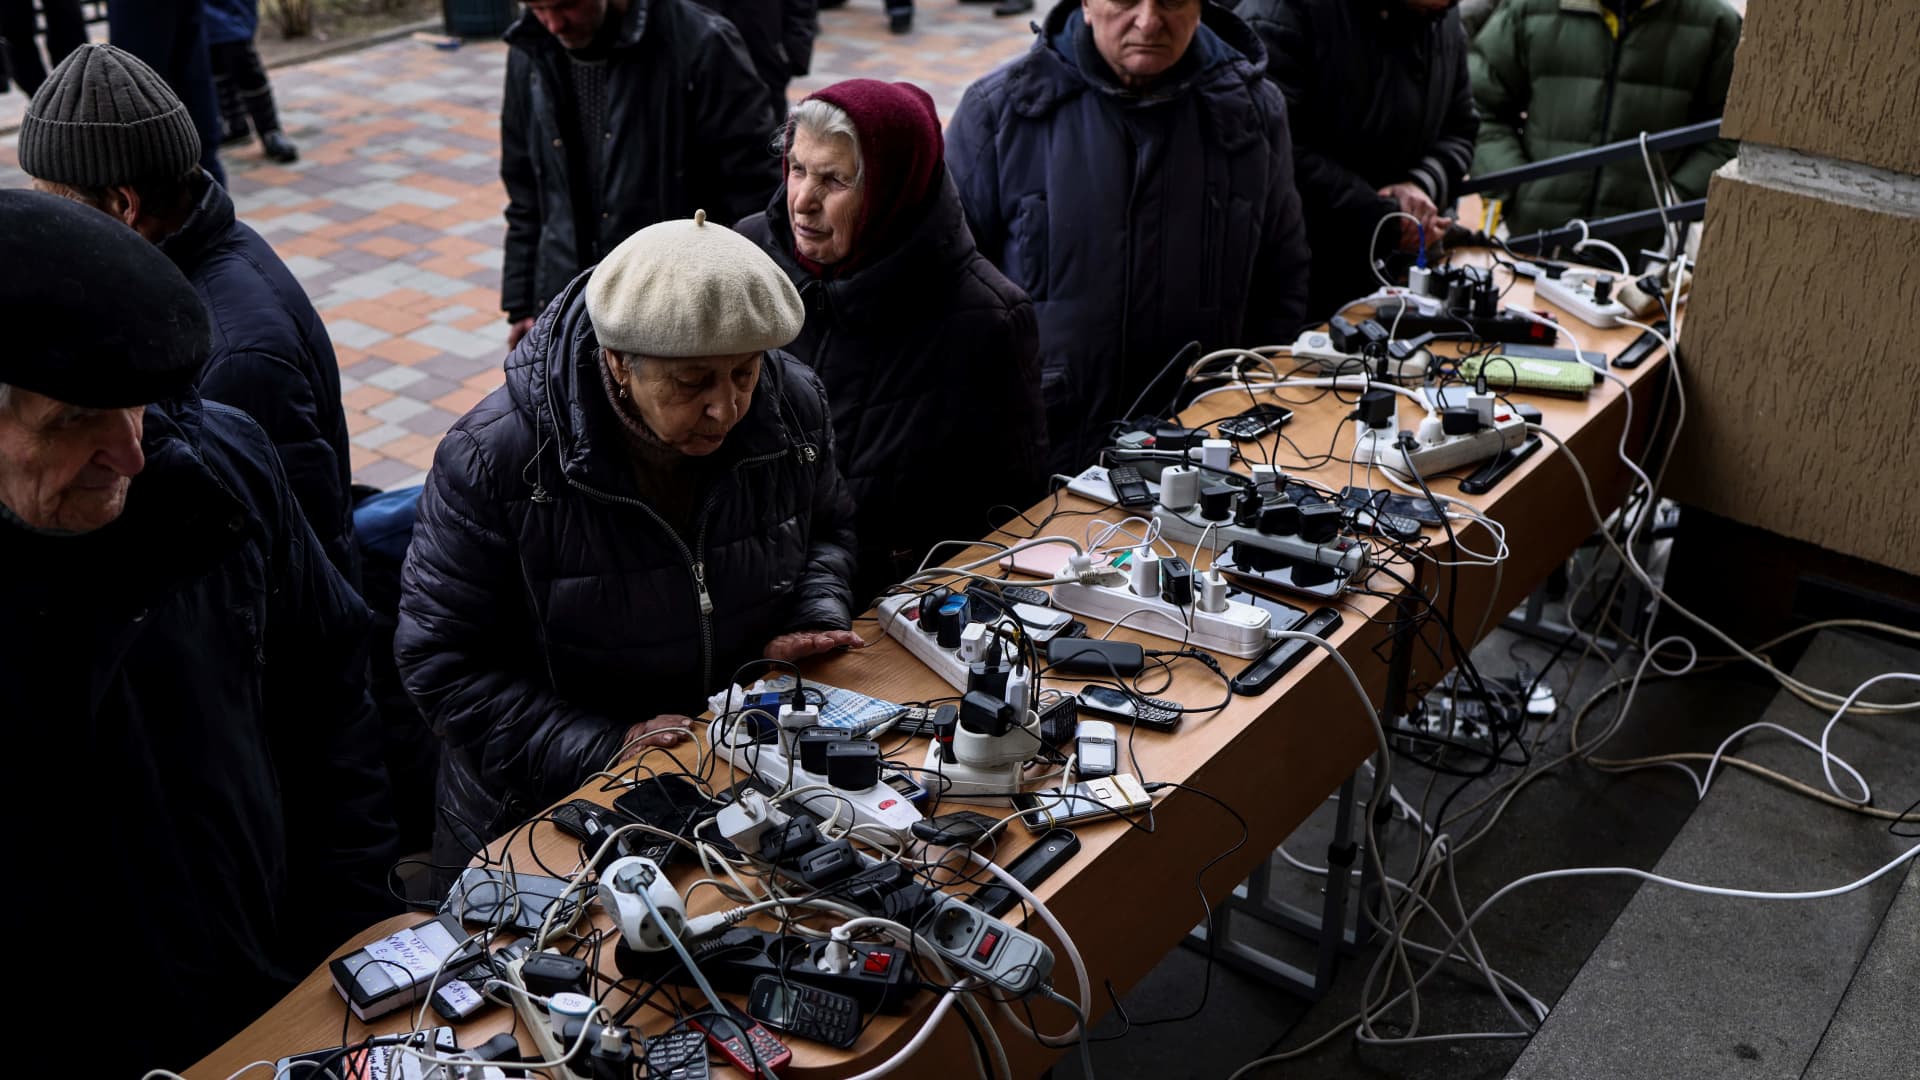 People charge their cellphones in a public building in Bucha, northwest of Kyiv, on April 6, 2022, during Russia's military invasion launched on Ukraine.